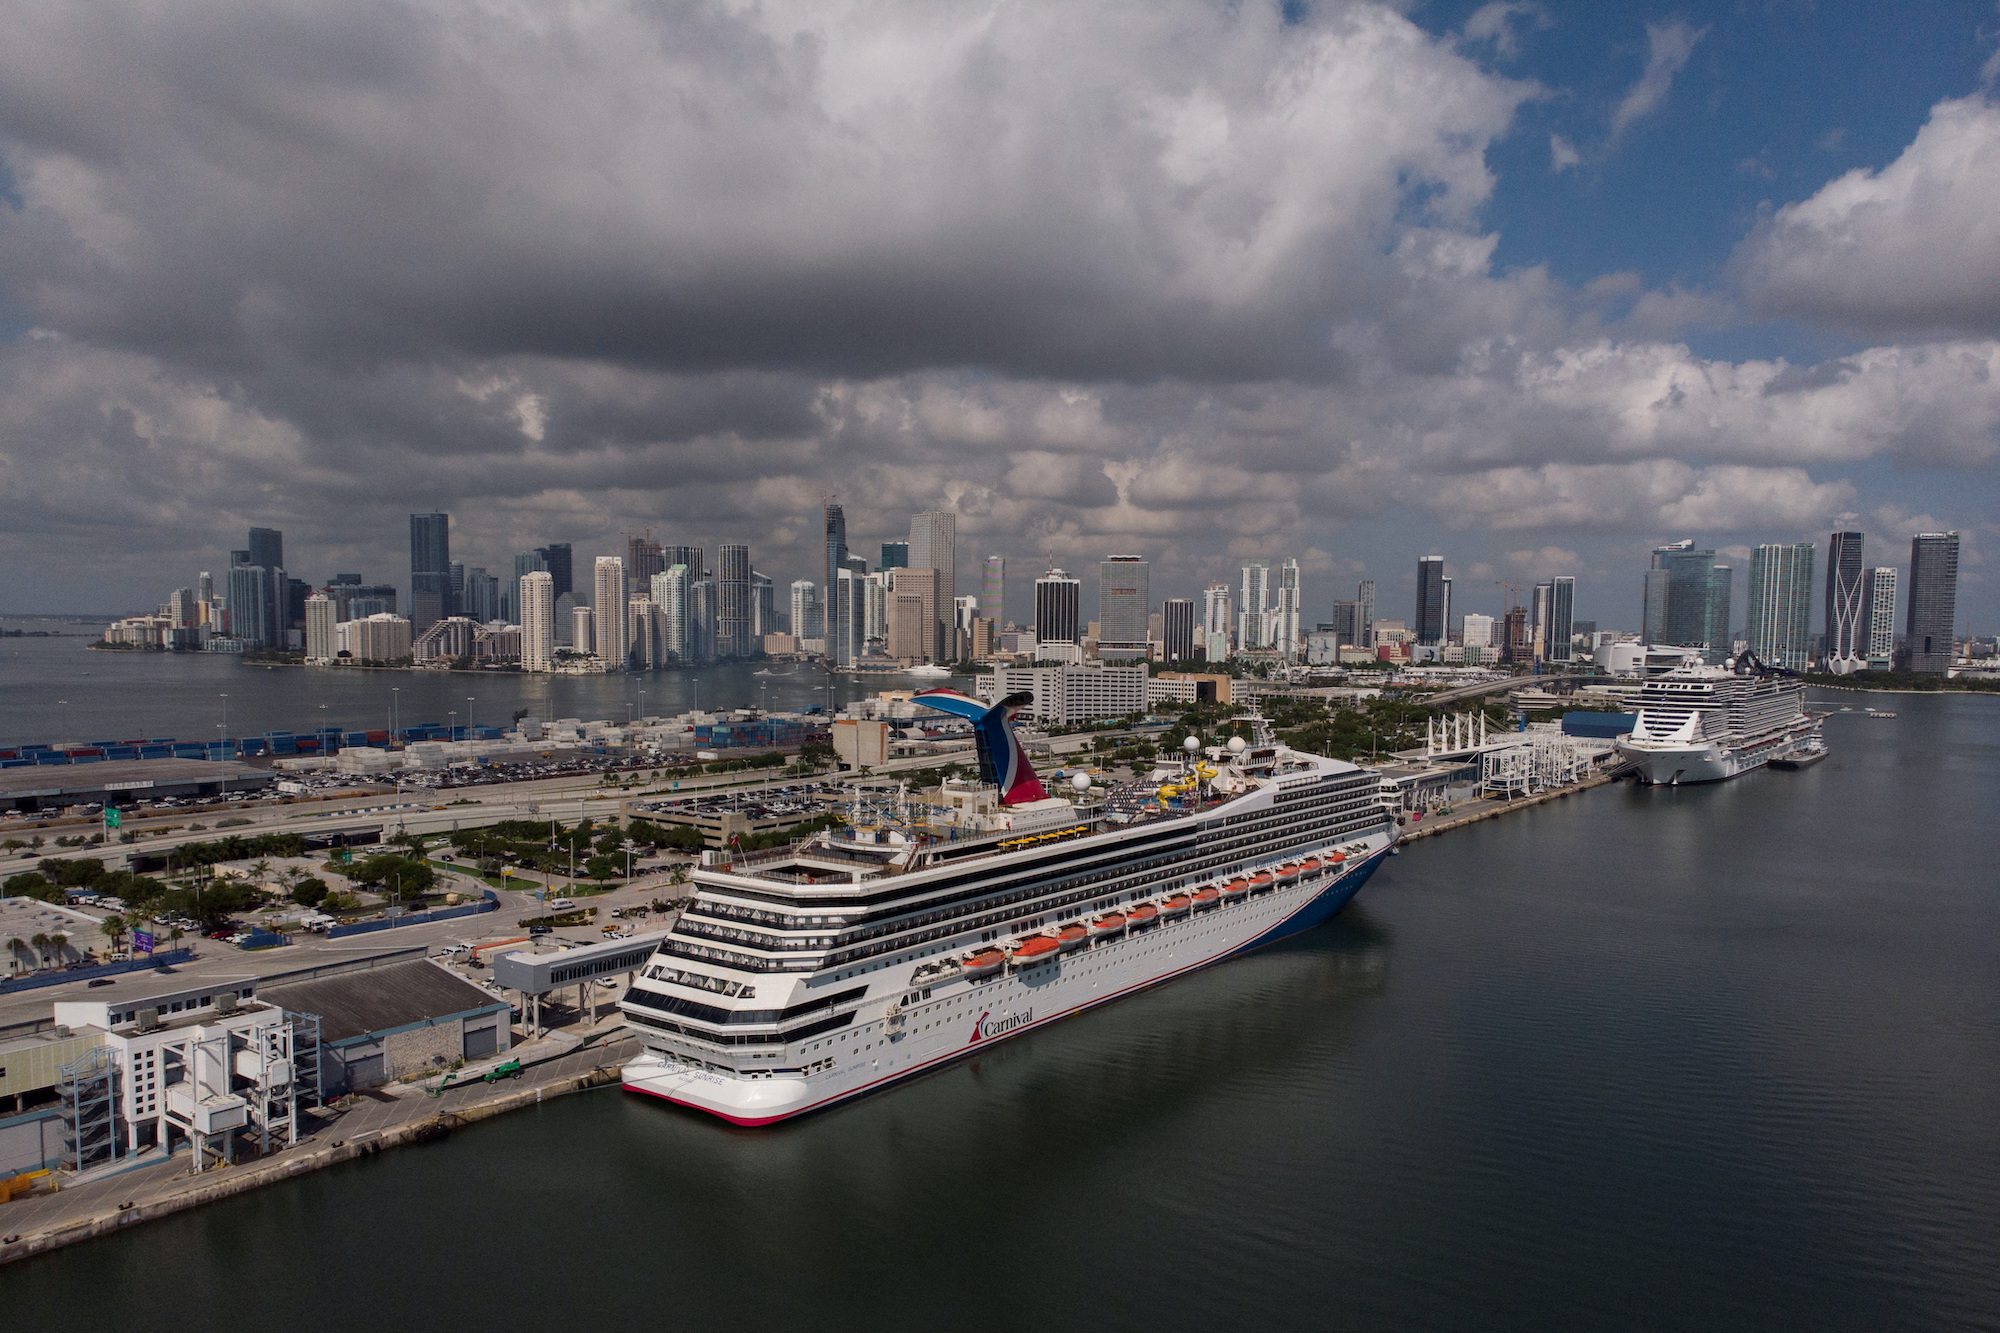 Carnival Corp Posts Smaller Loss as it Tightens Control on Costs